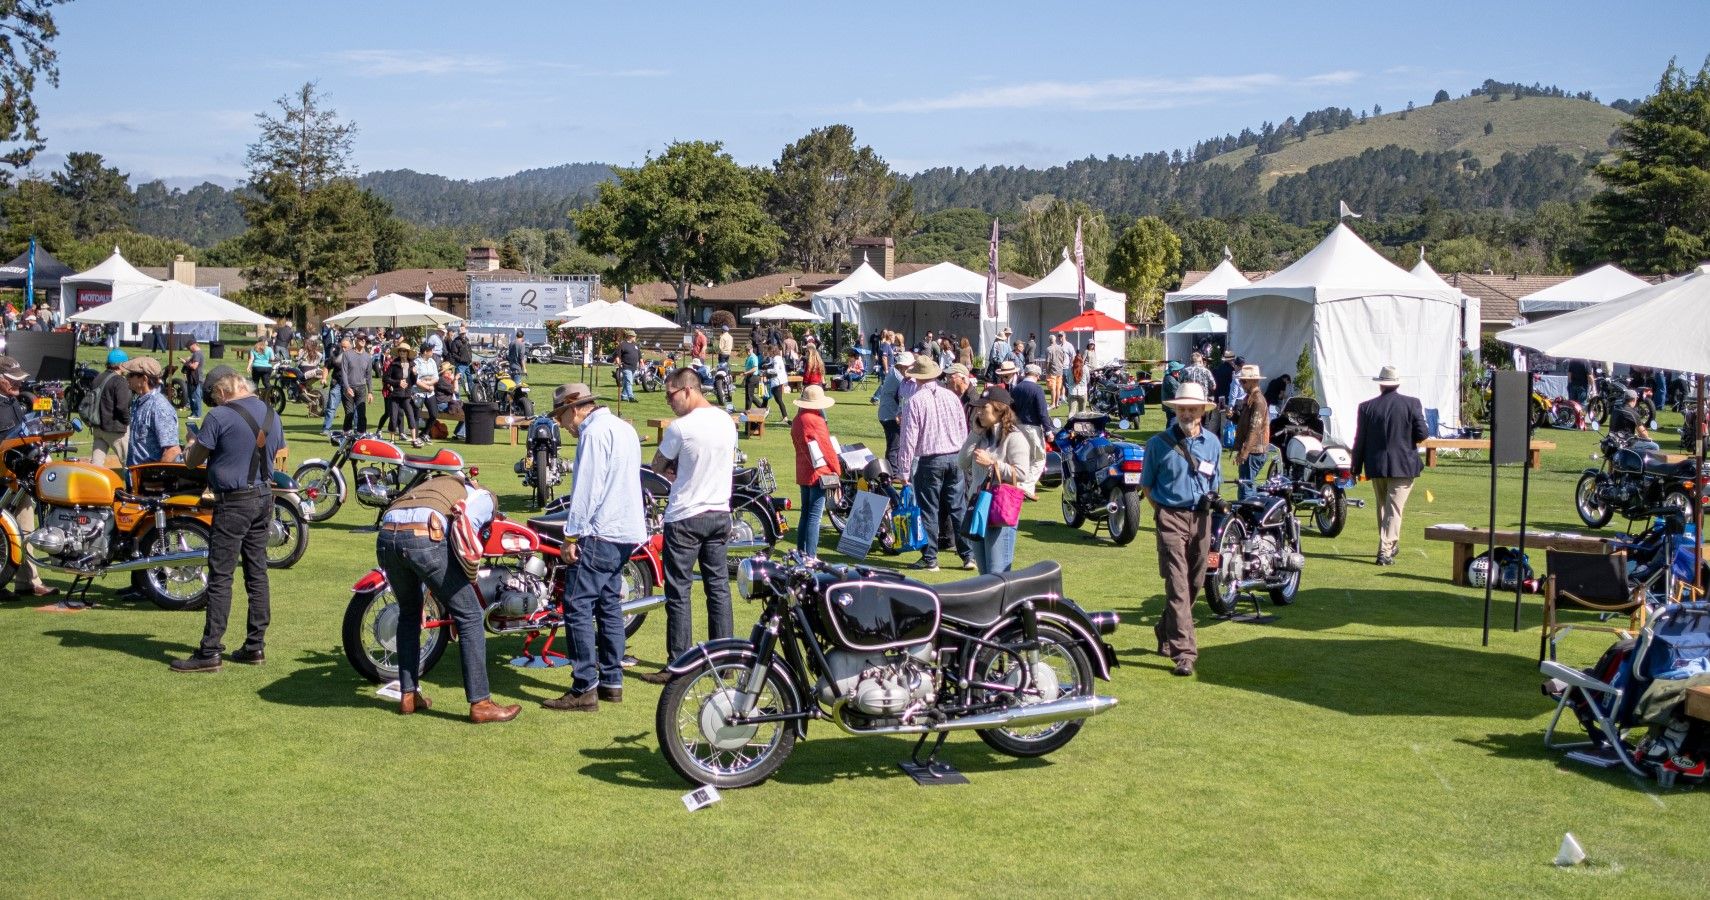 Quail Motorcycle Gathering is filled with unique motorcycles